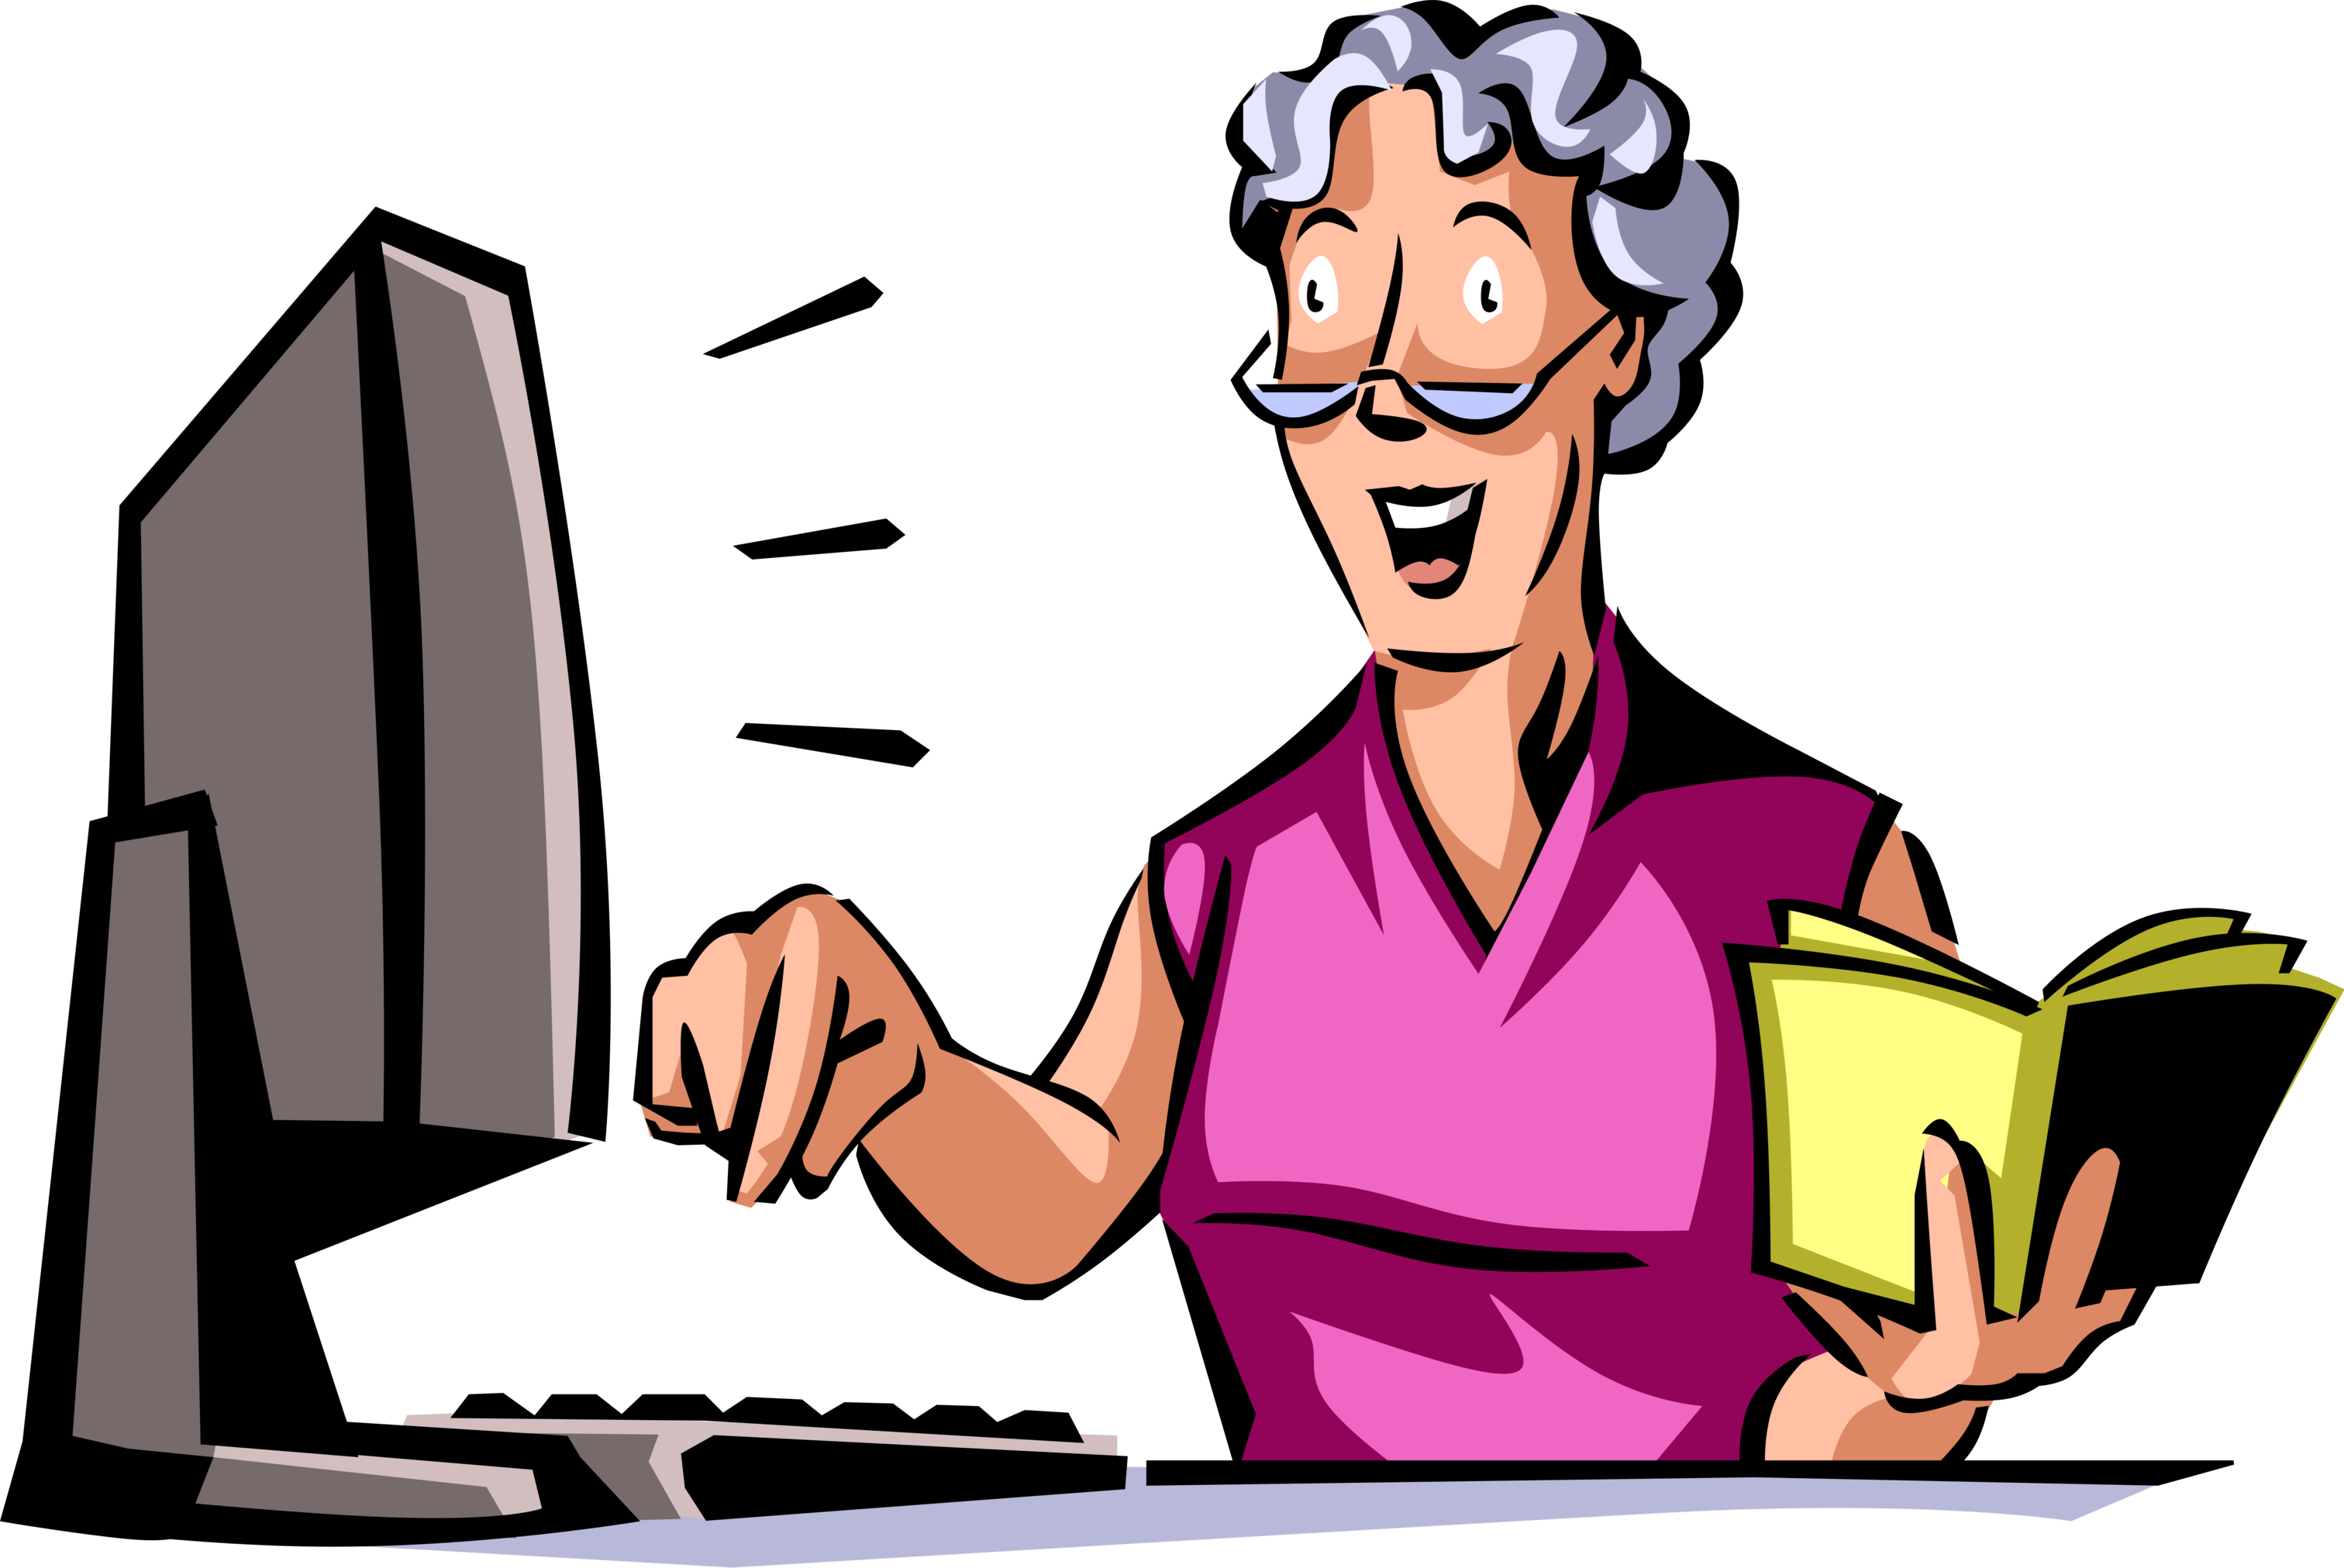 Vector image of woman with white hair and glasses in front of computer screen with excited expression.